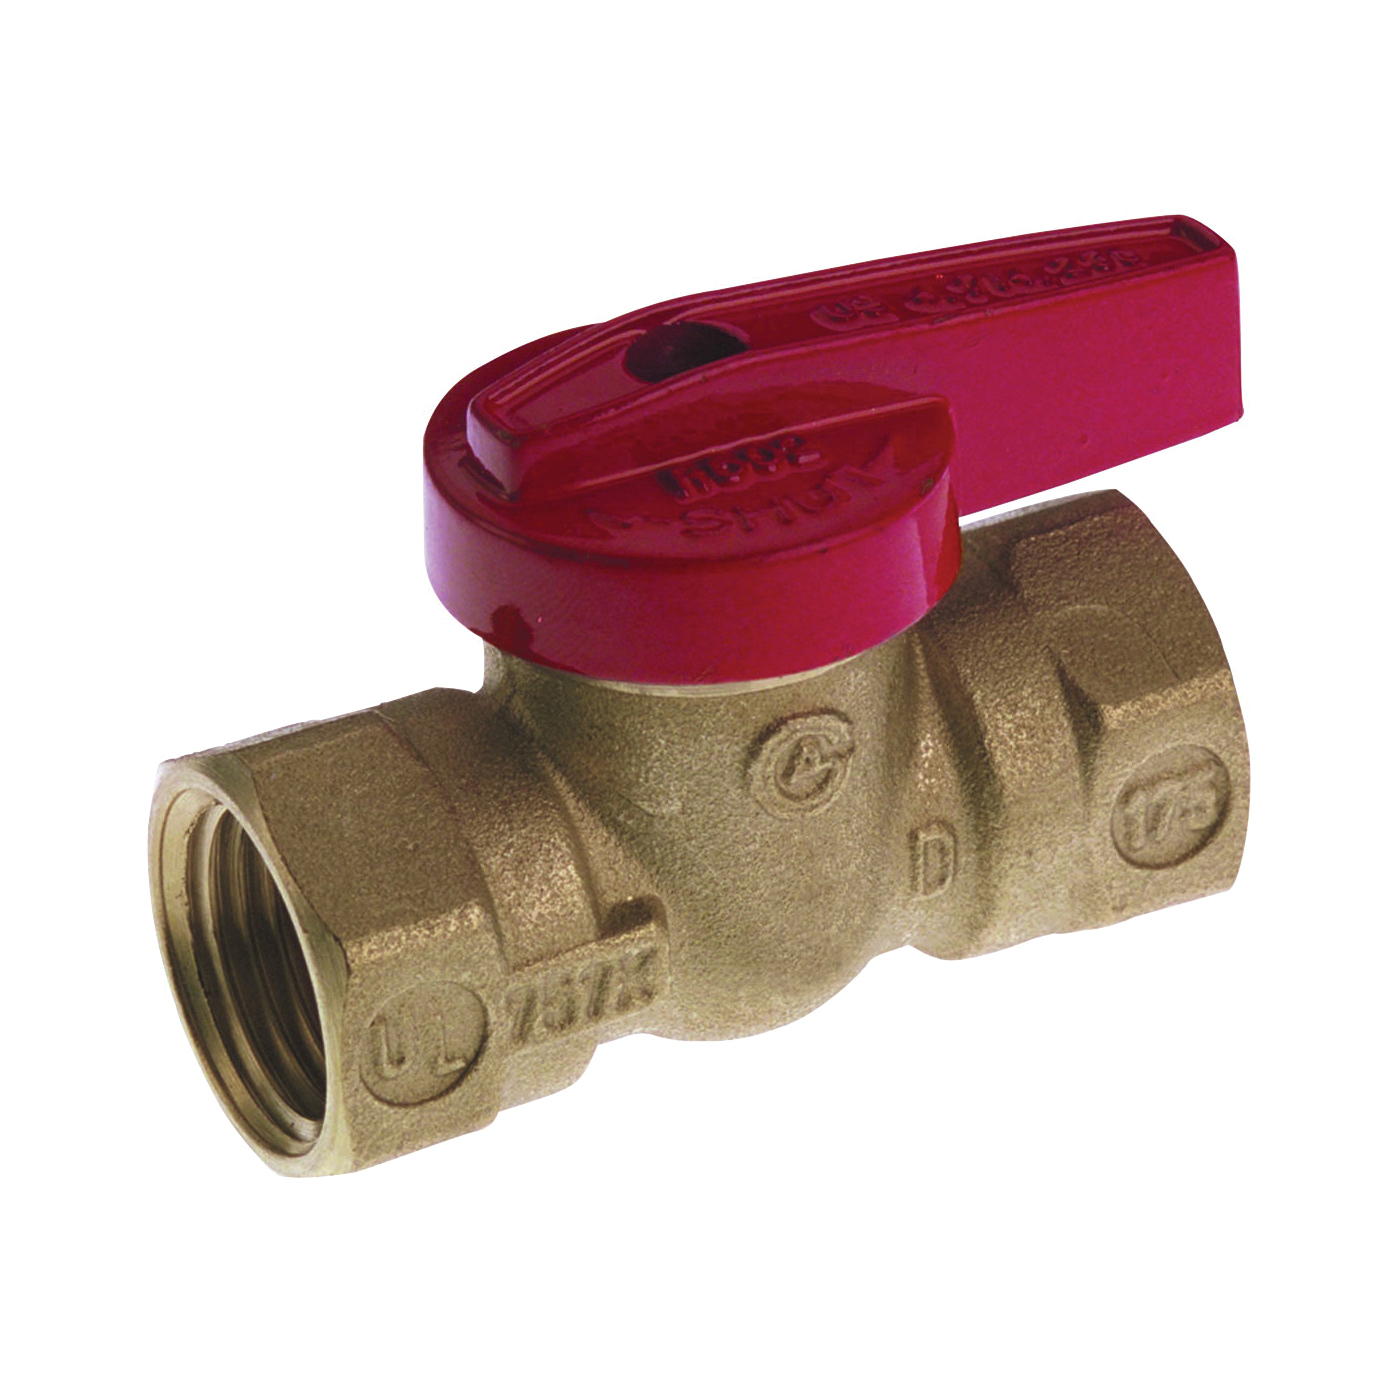 B & K ProLine Series 110-522HC Gas Ball Valve, 3/8 in Connection, FPT, 200 psi Pressure, Manual Actuator, Brass Body - 1